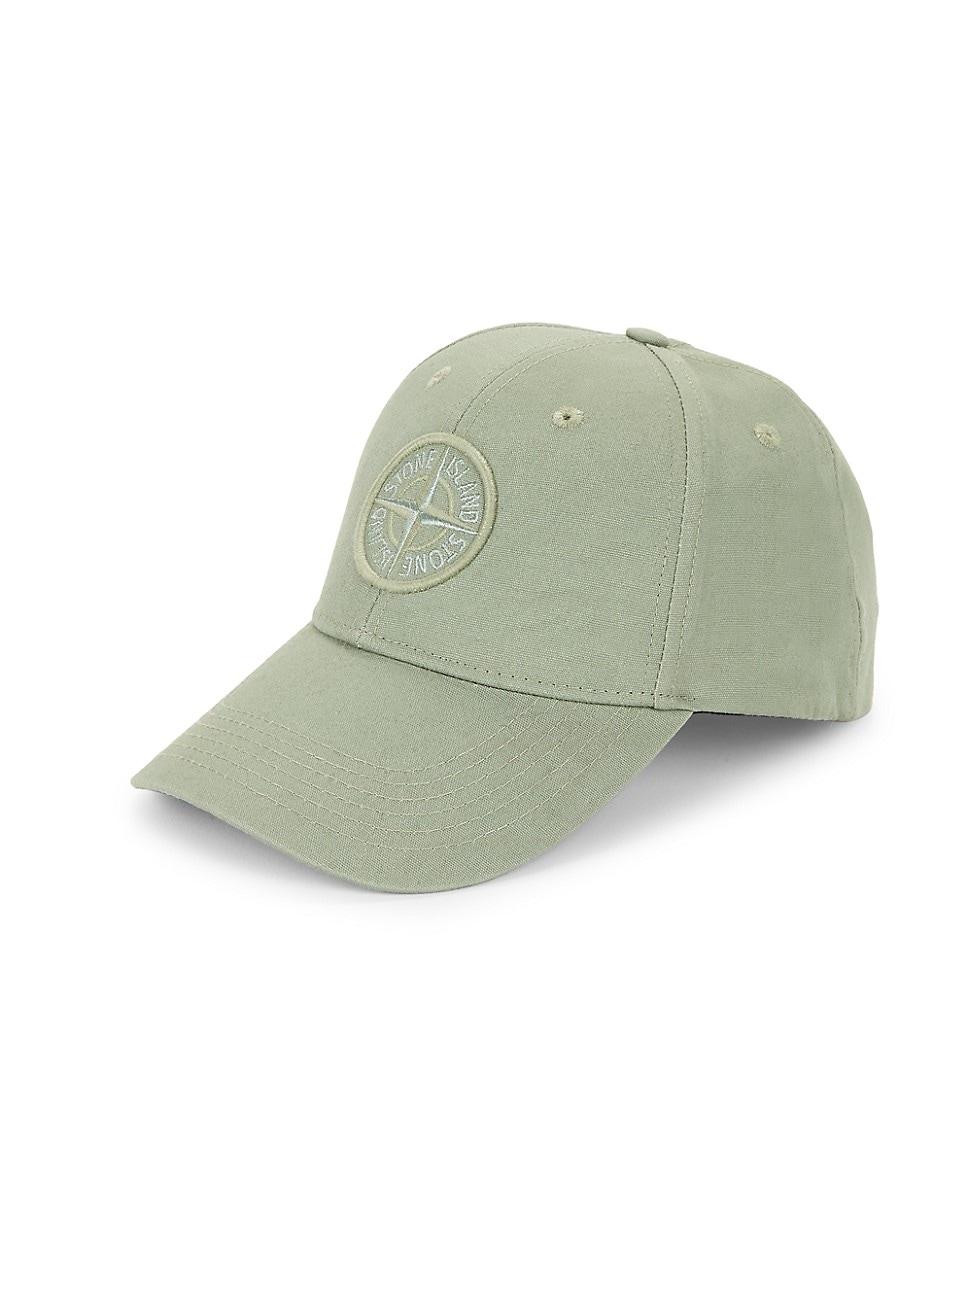 Stone Island Cotton Tonal Patch Baseball Cap in Sage (Green) for Men - Lyst